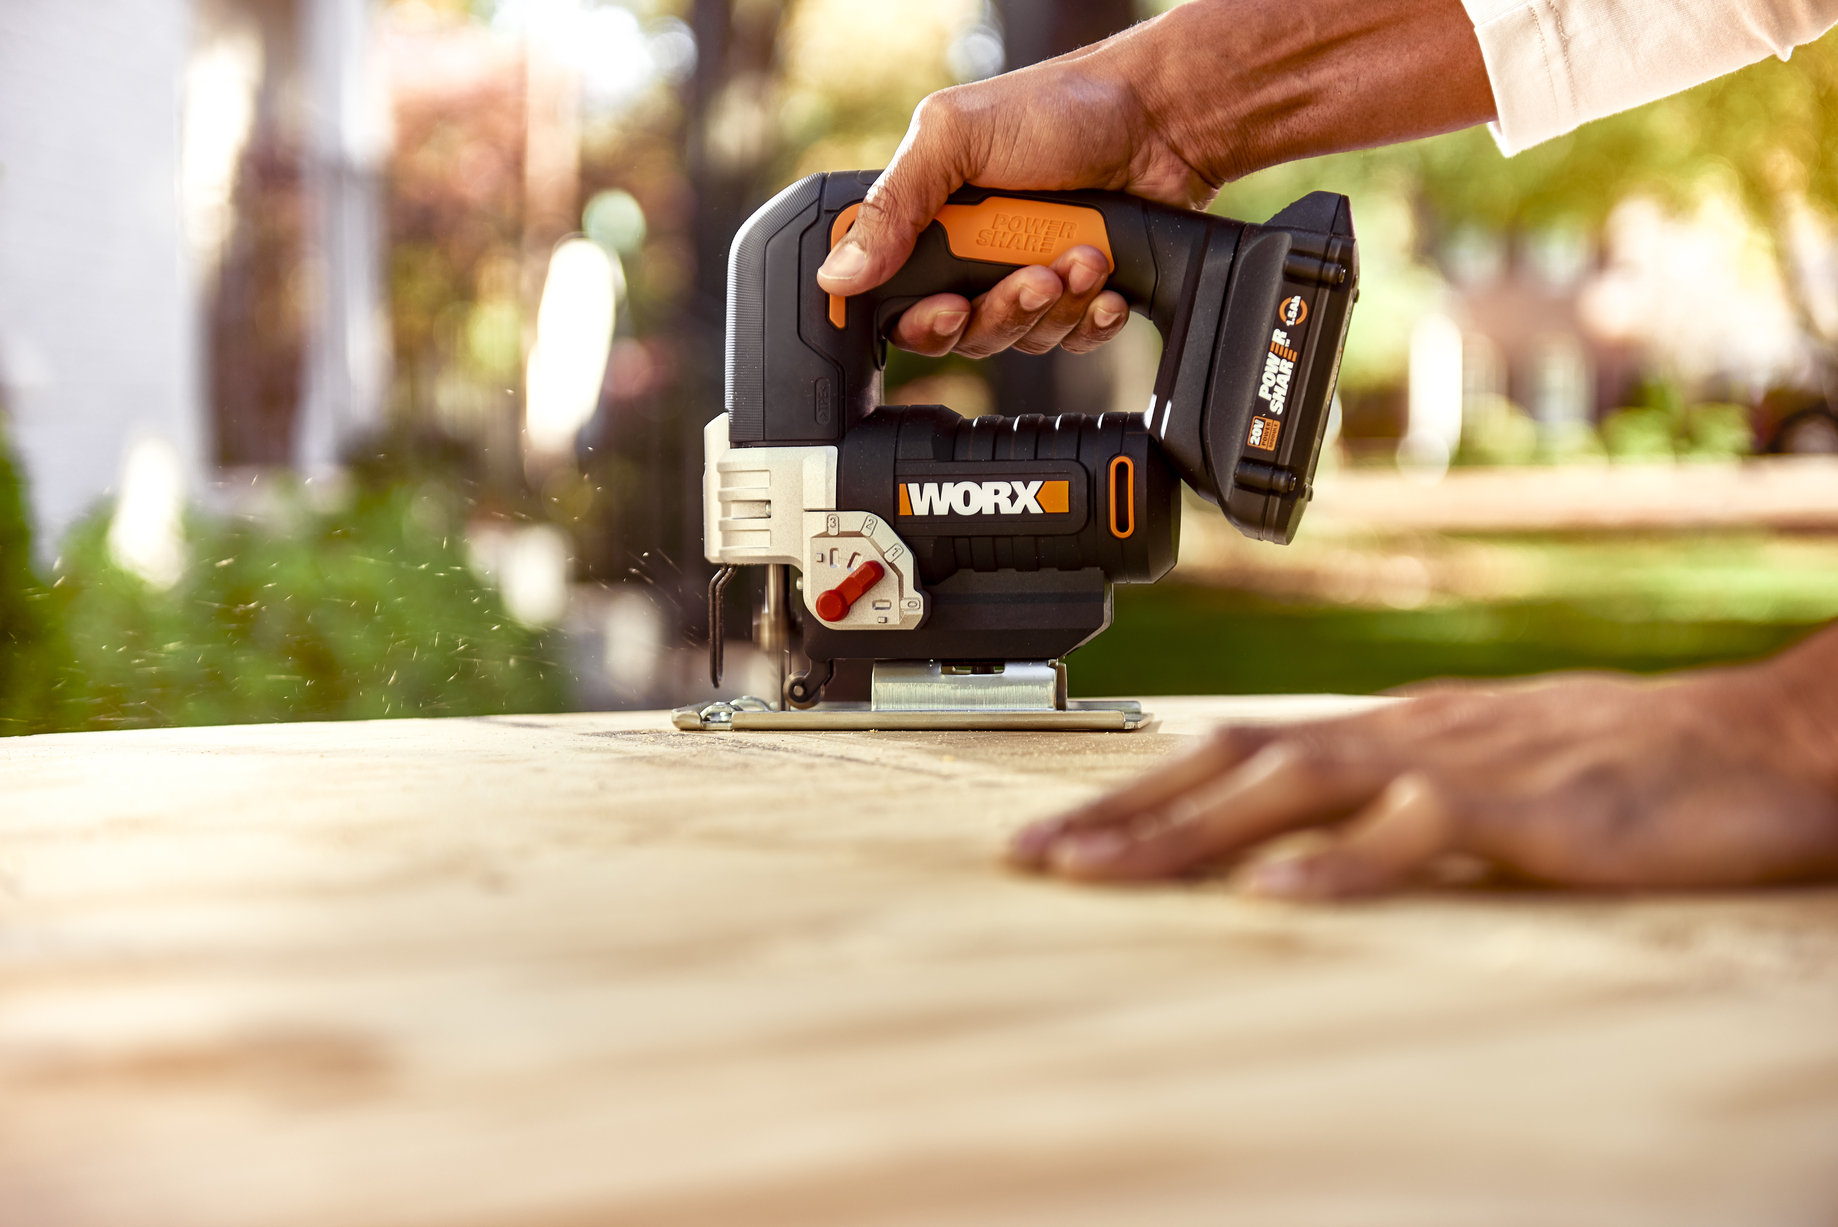 WORX 20V Jigsaw makes cutting wood and other materials easy by simply changing blades.